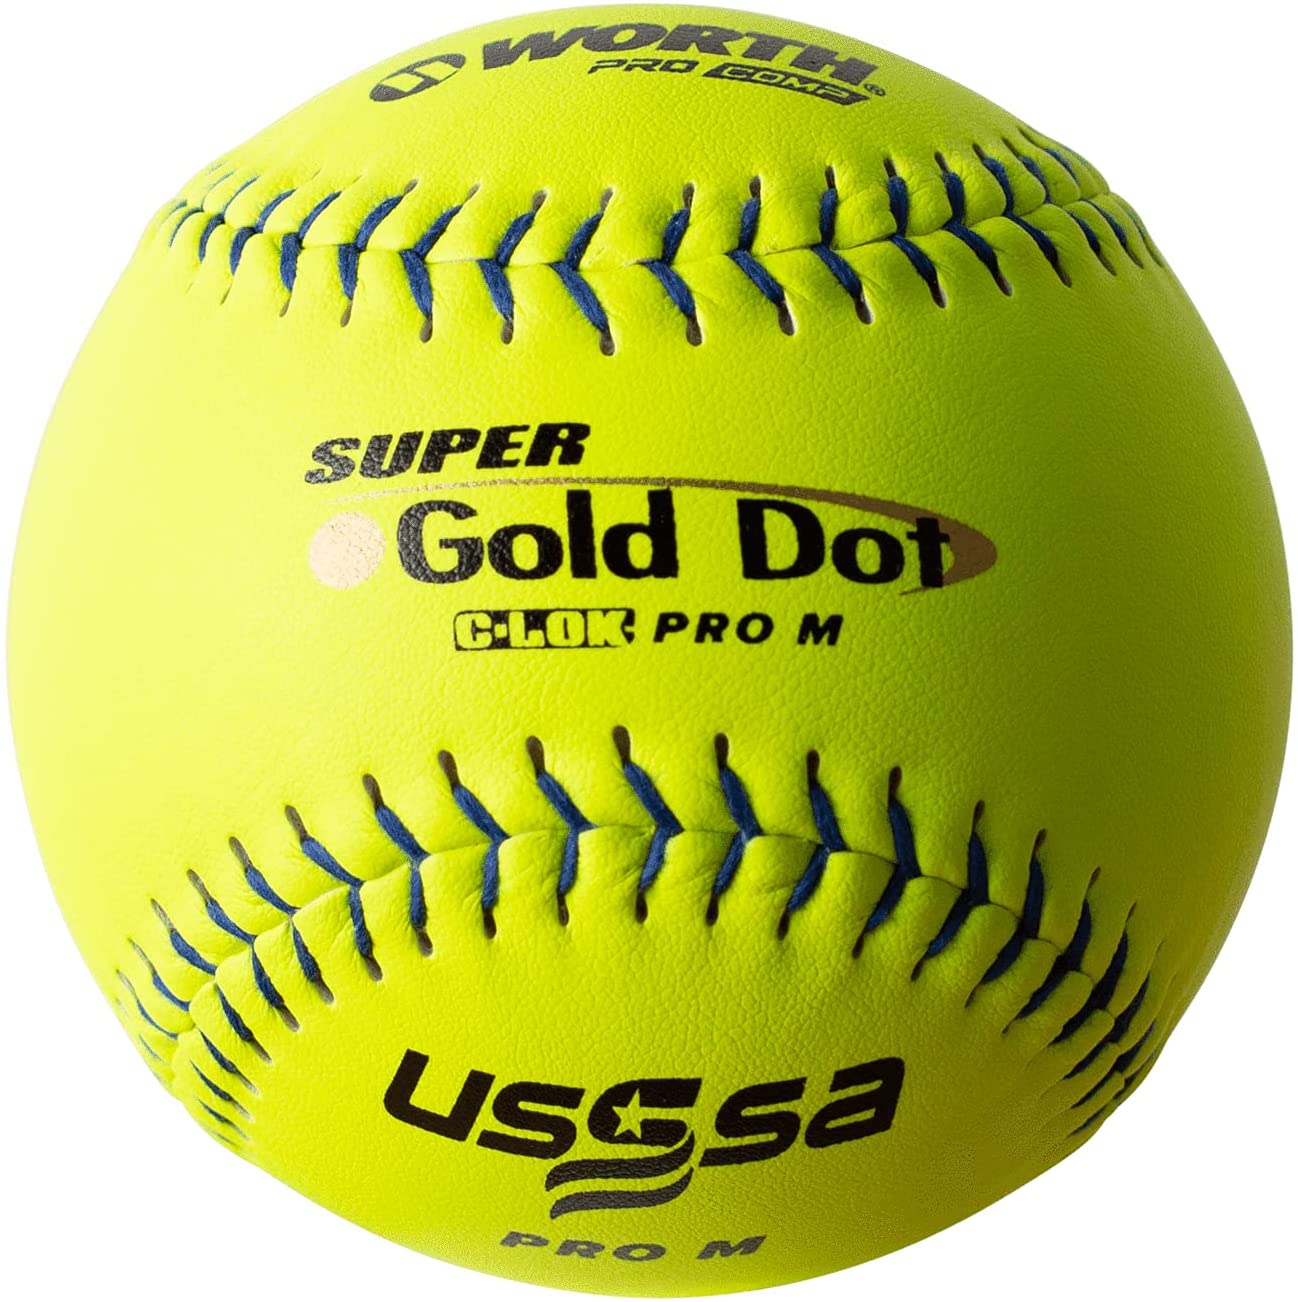  12 Slowpitch Softball USSSA PRO M Stamp Pro-M is the Official Conference USSSA Slowpitch Ball  44 Core 375 Compression Composite Cover 